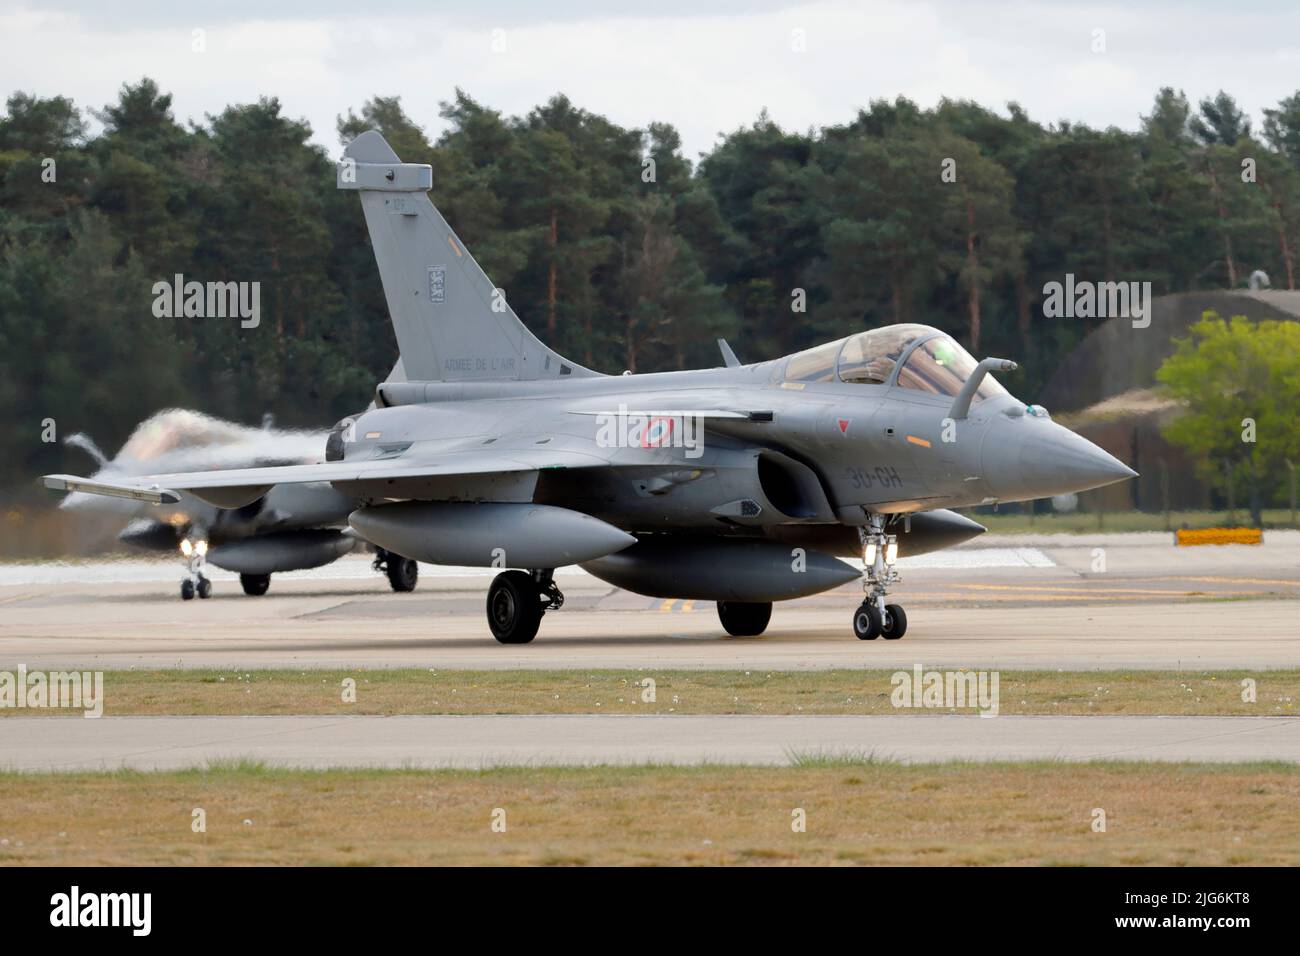 Dassault Rafale, a French twin-engine, canard delta wing, multirole fighter aircraft, seen here on an exercise at RAF Lakenheath, Suffolk, UK Stock Photo